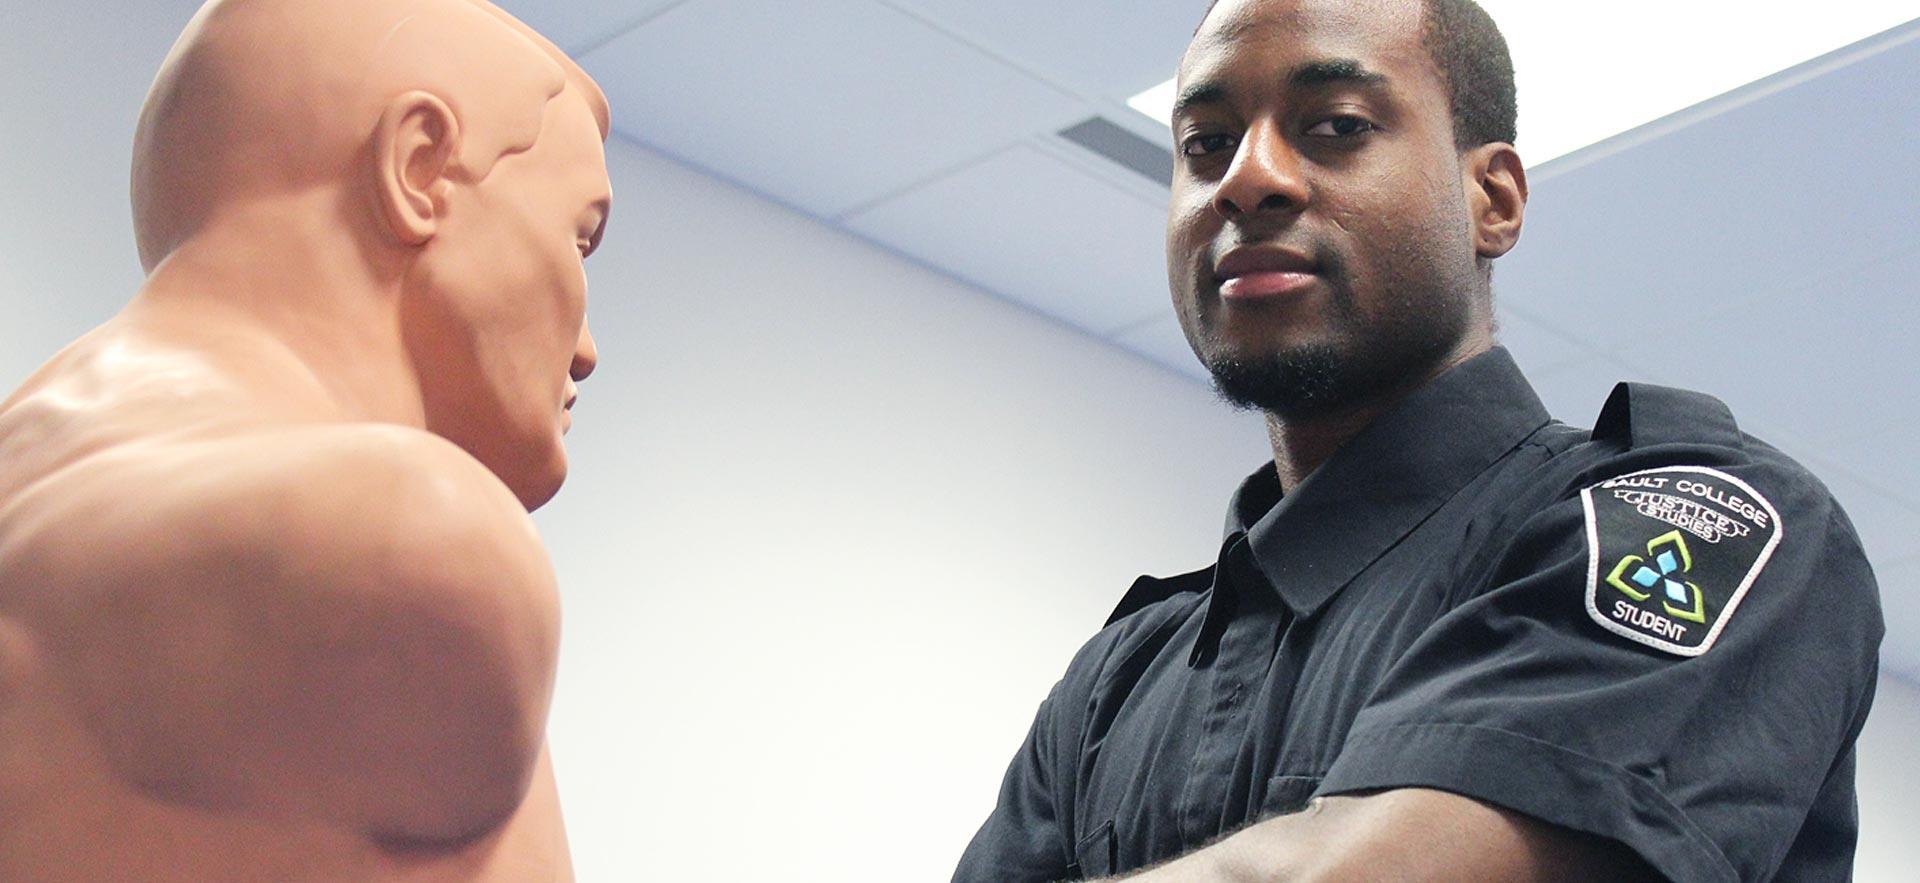 Male Police Foundations student poses next to a Criminal Punching Boxing Dummy.